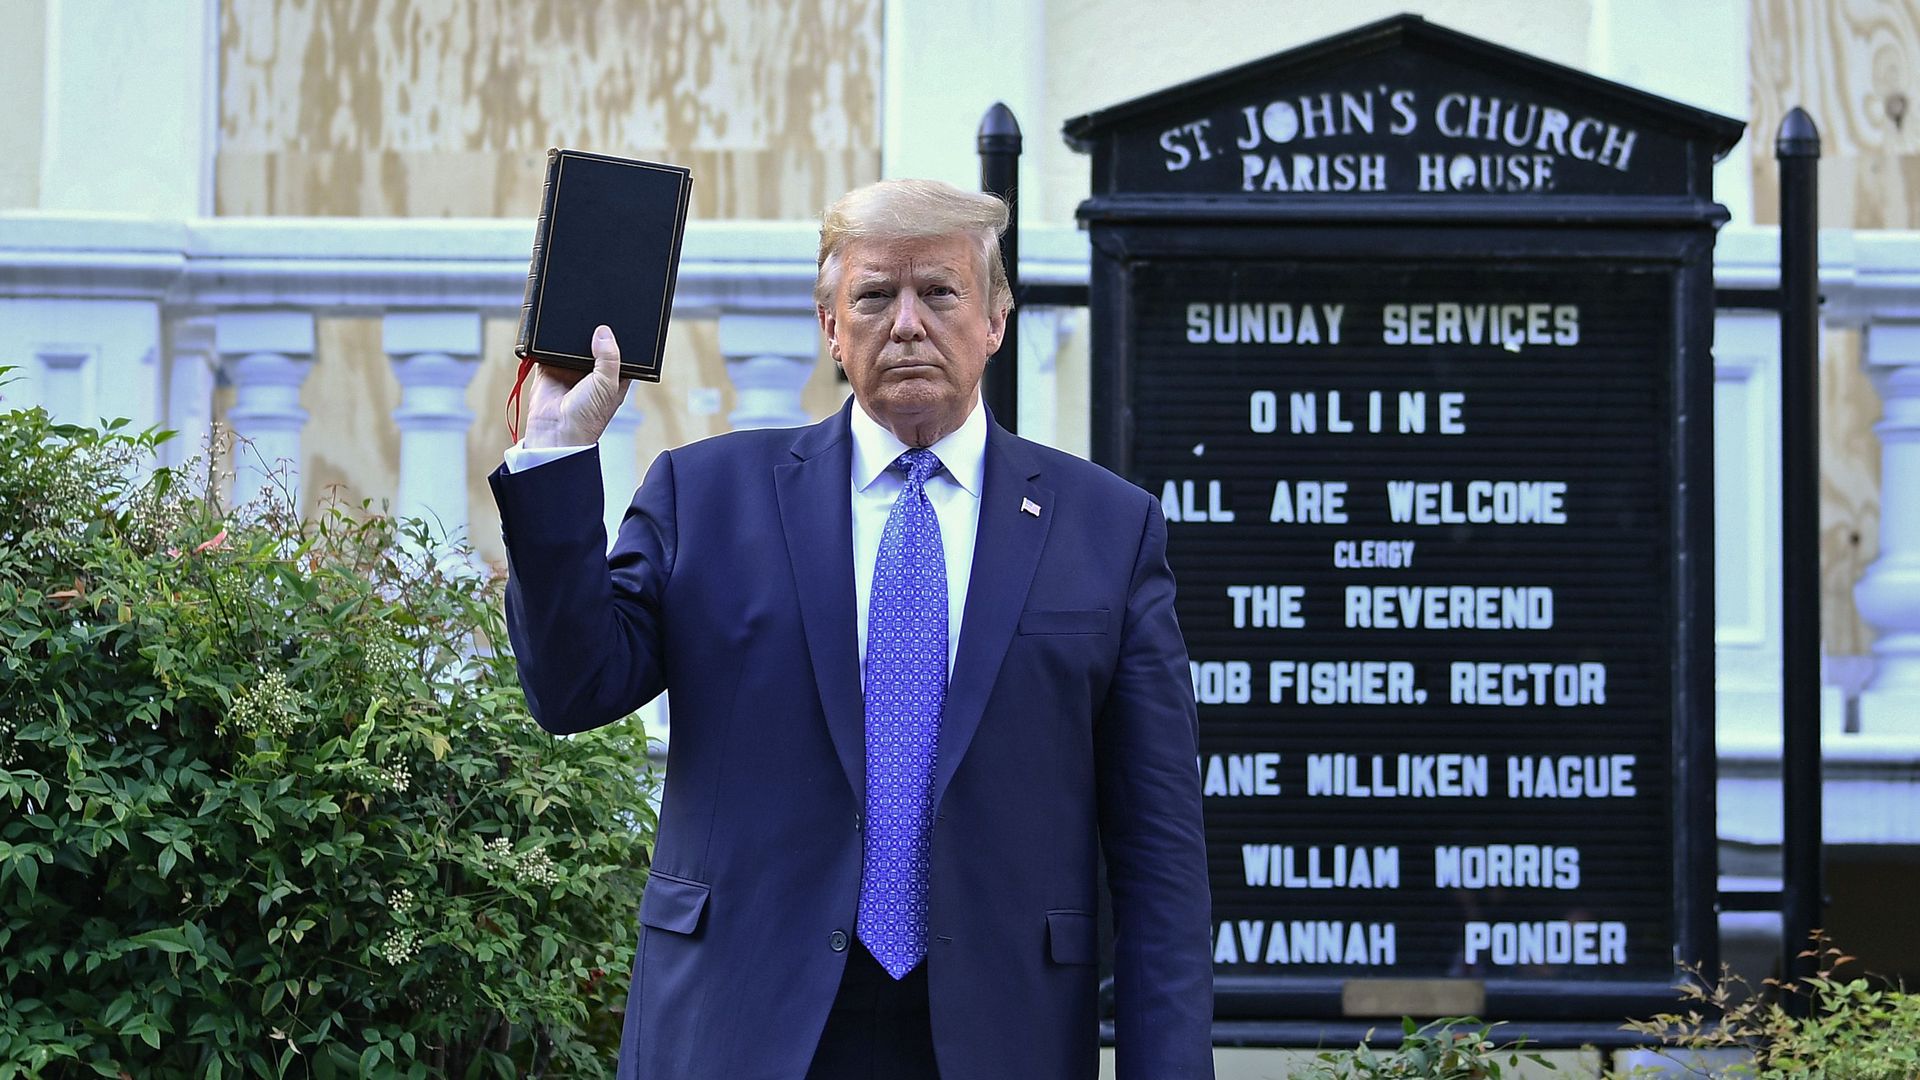 Trump at the church, holding up a bible